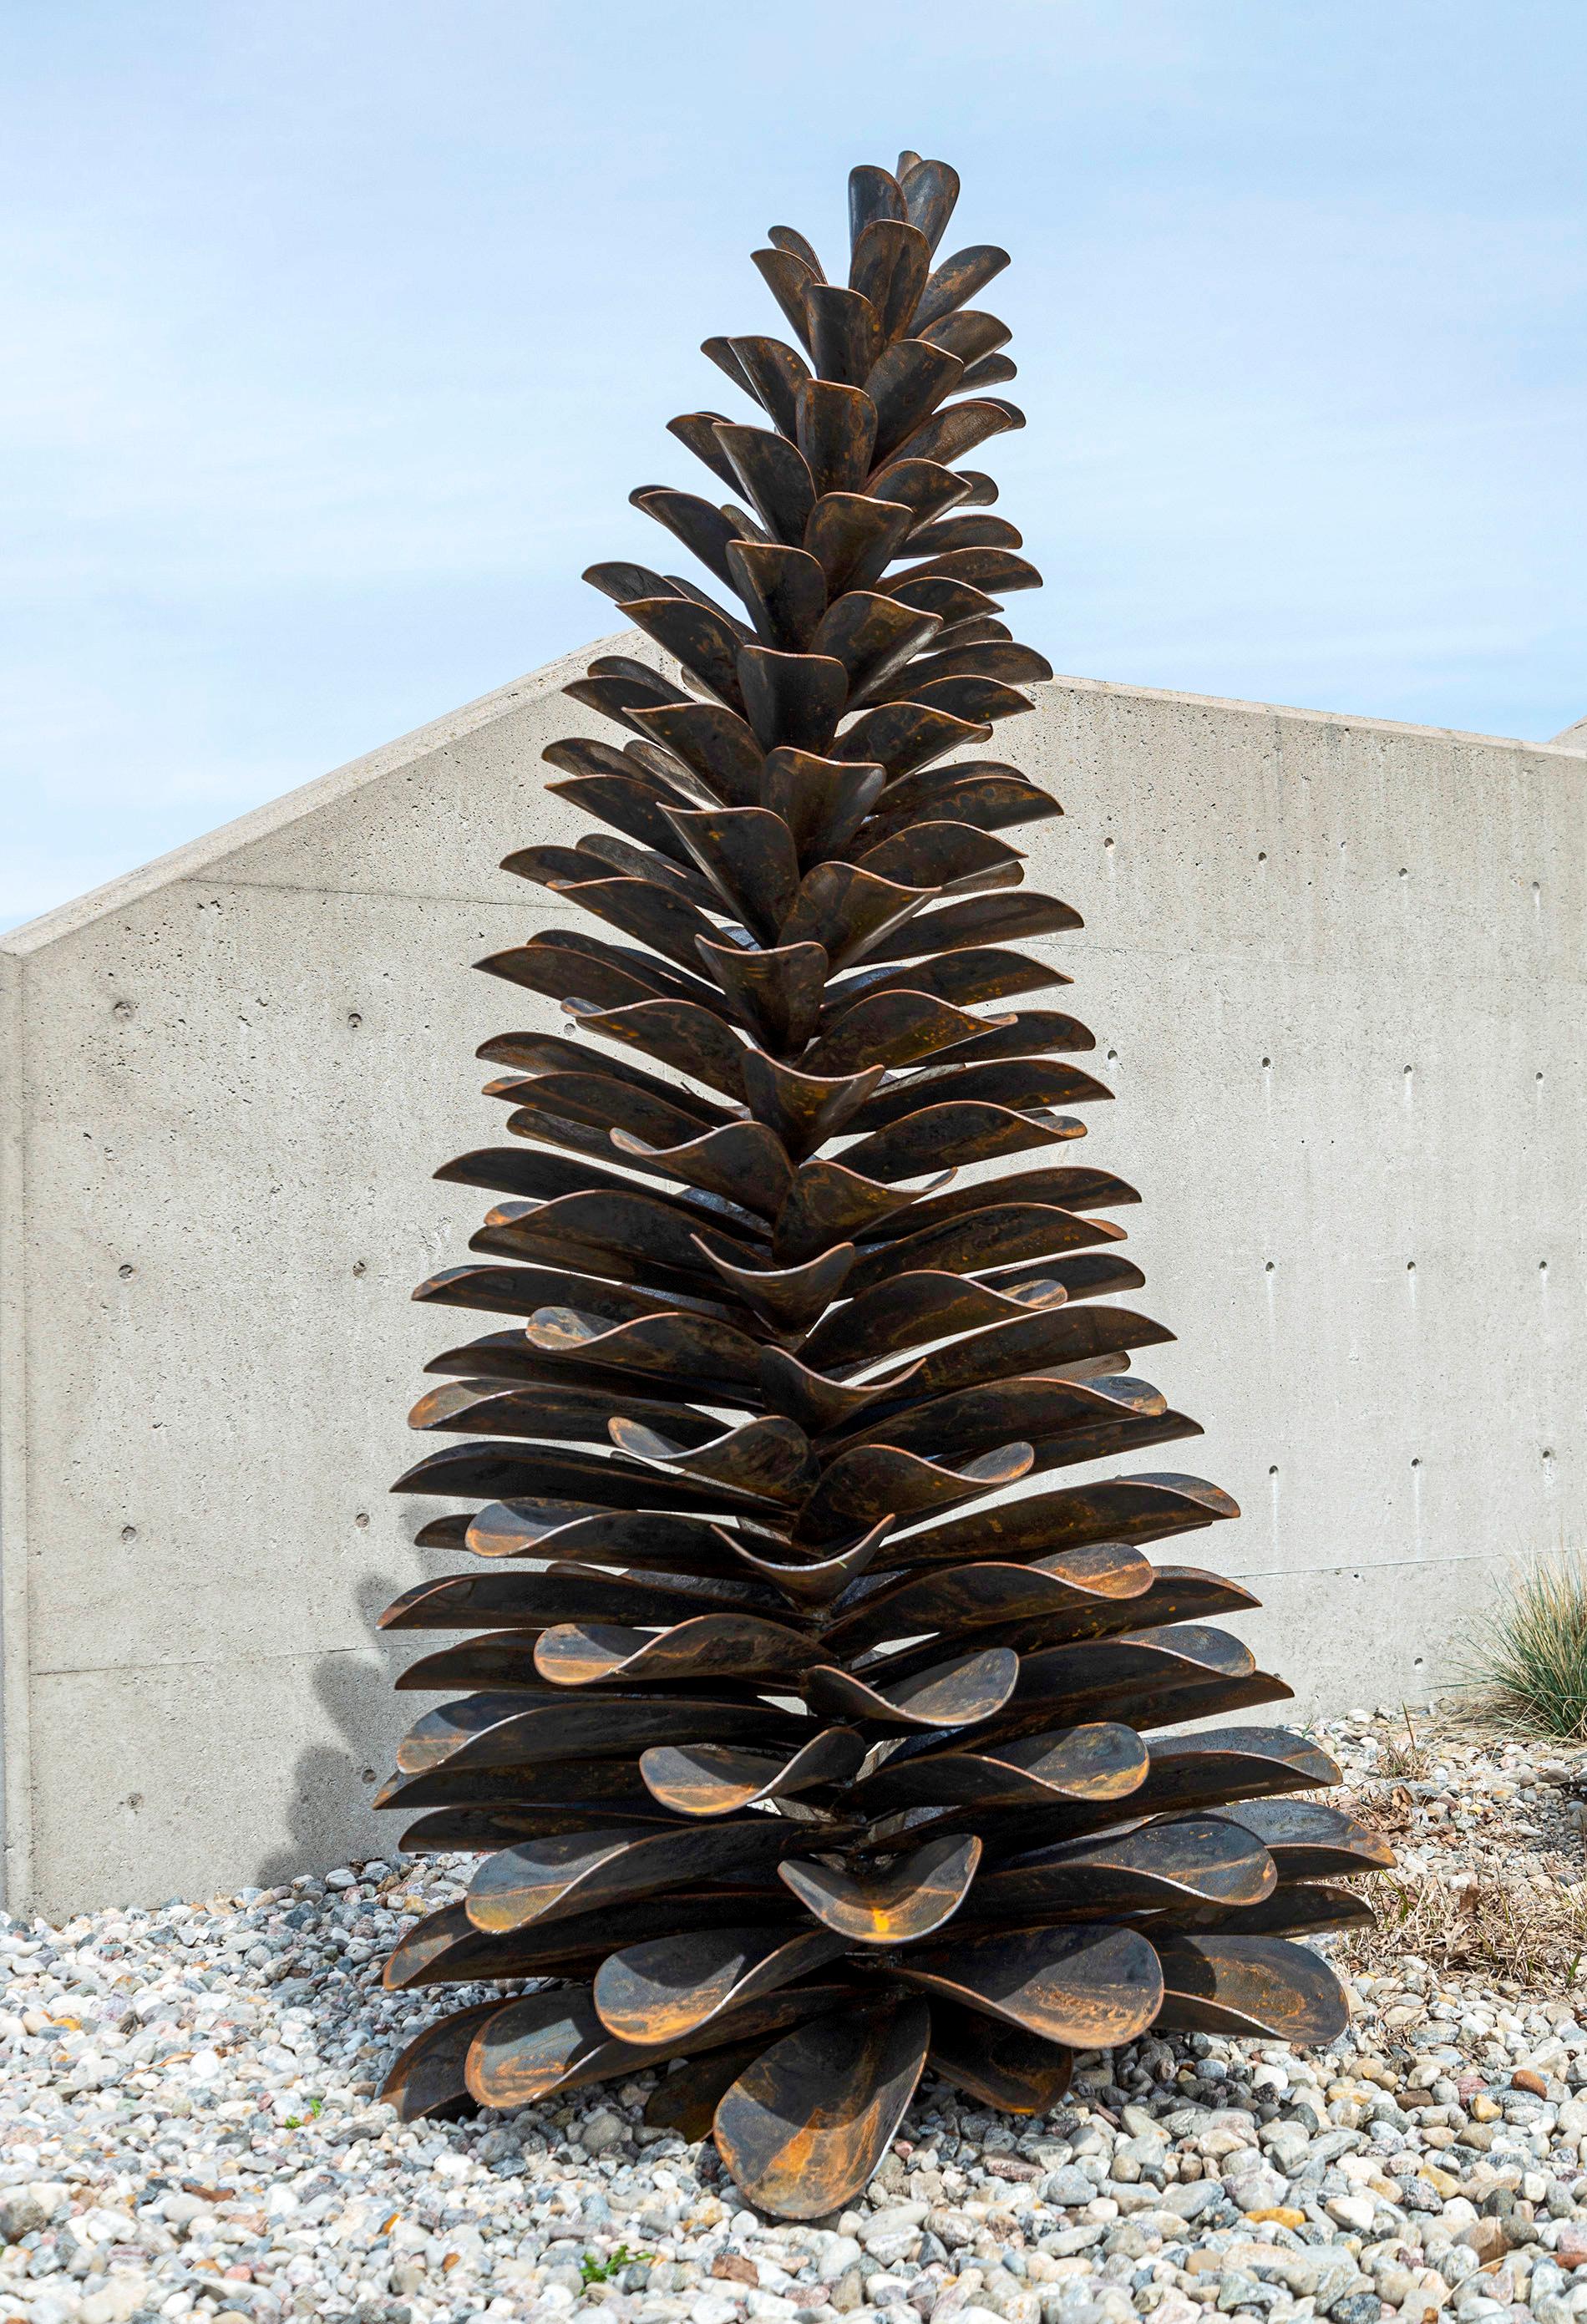 Pine Cone 23-254 - large, naturally rusted, Weathering steel, outdoor sculpture - Sculpture by Floyd Elzinga